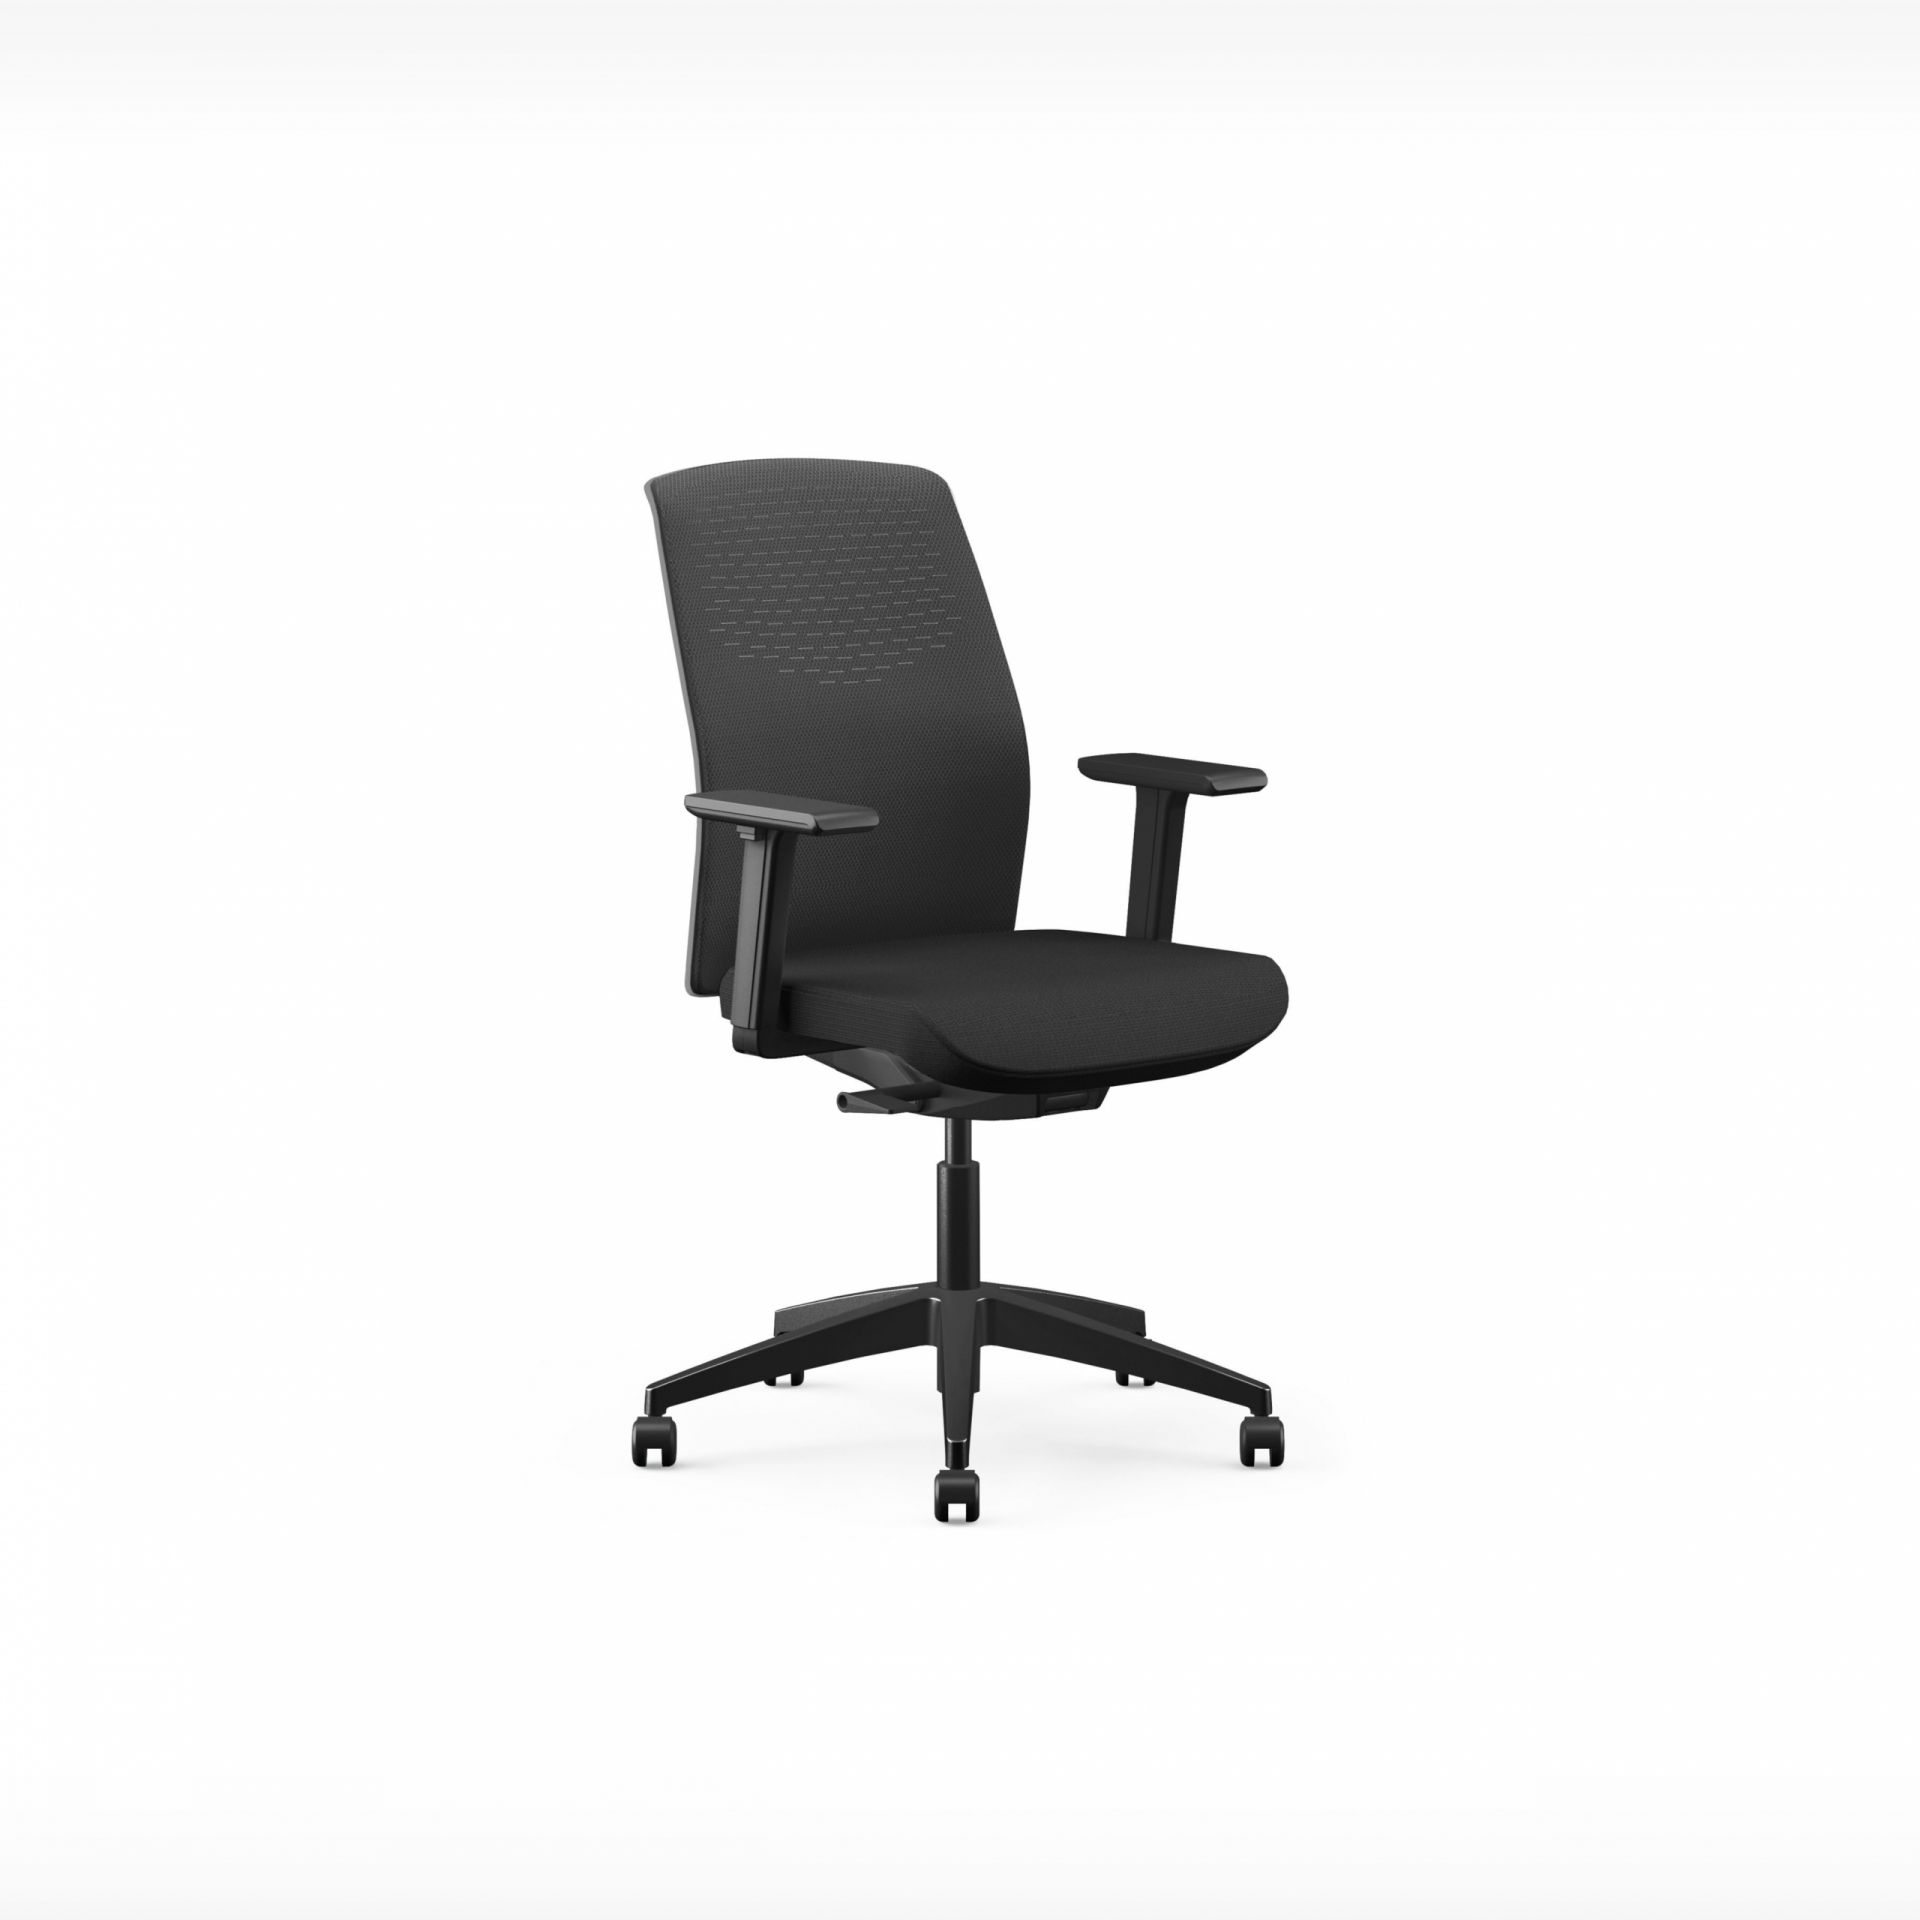 Yoyo Office chair with mesh back product image 8